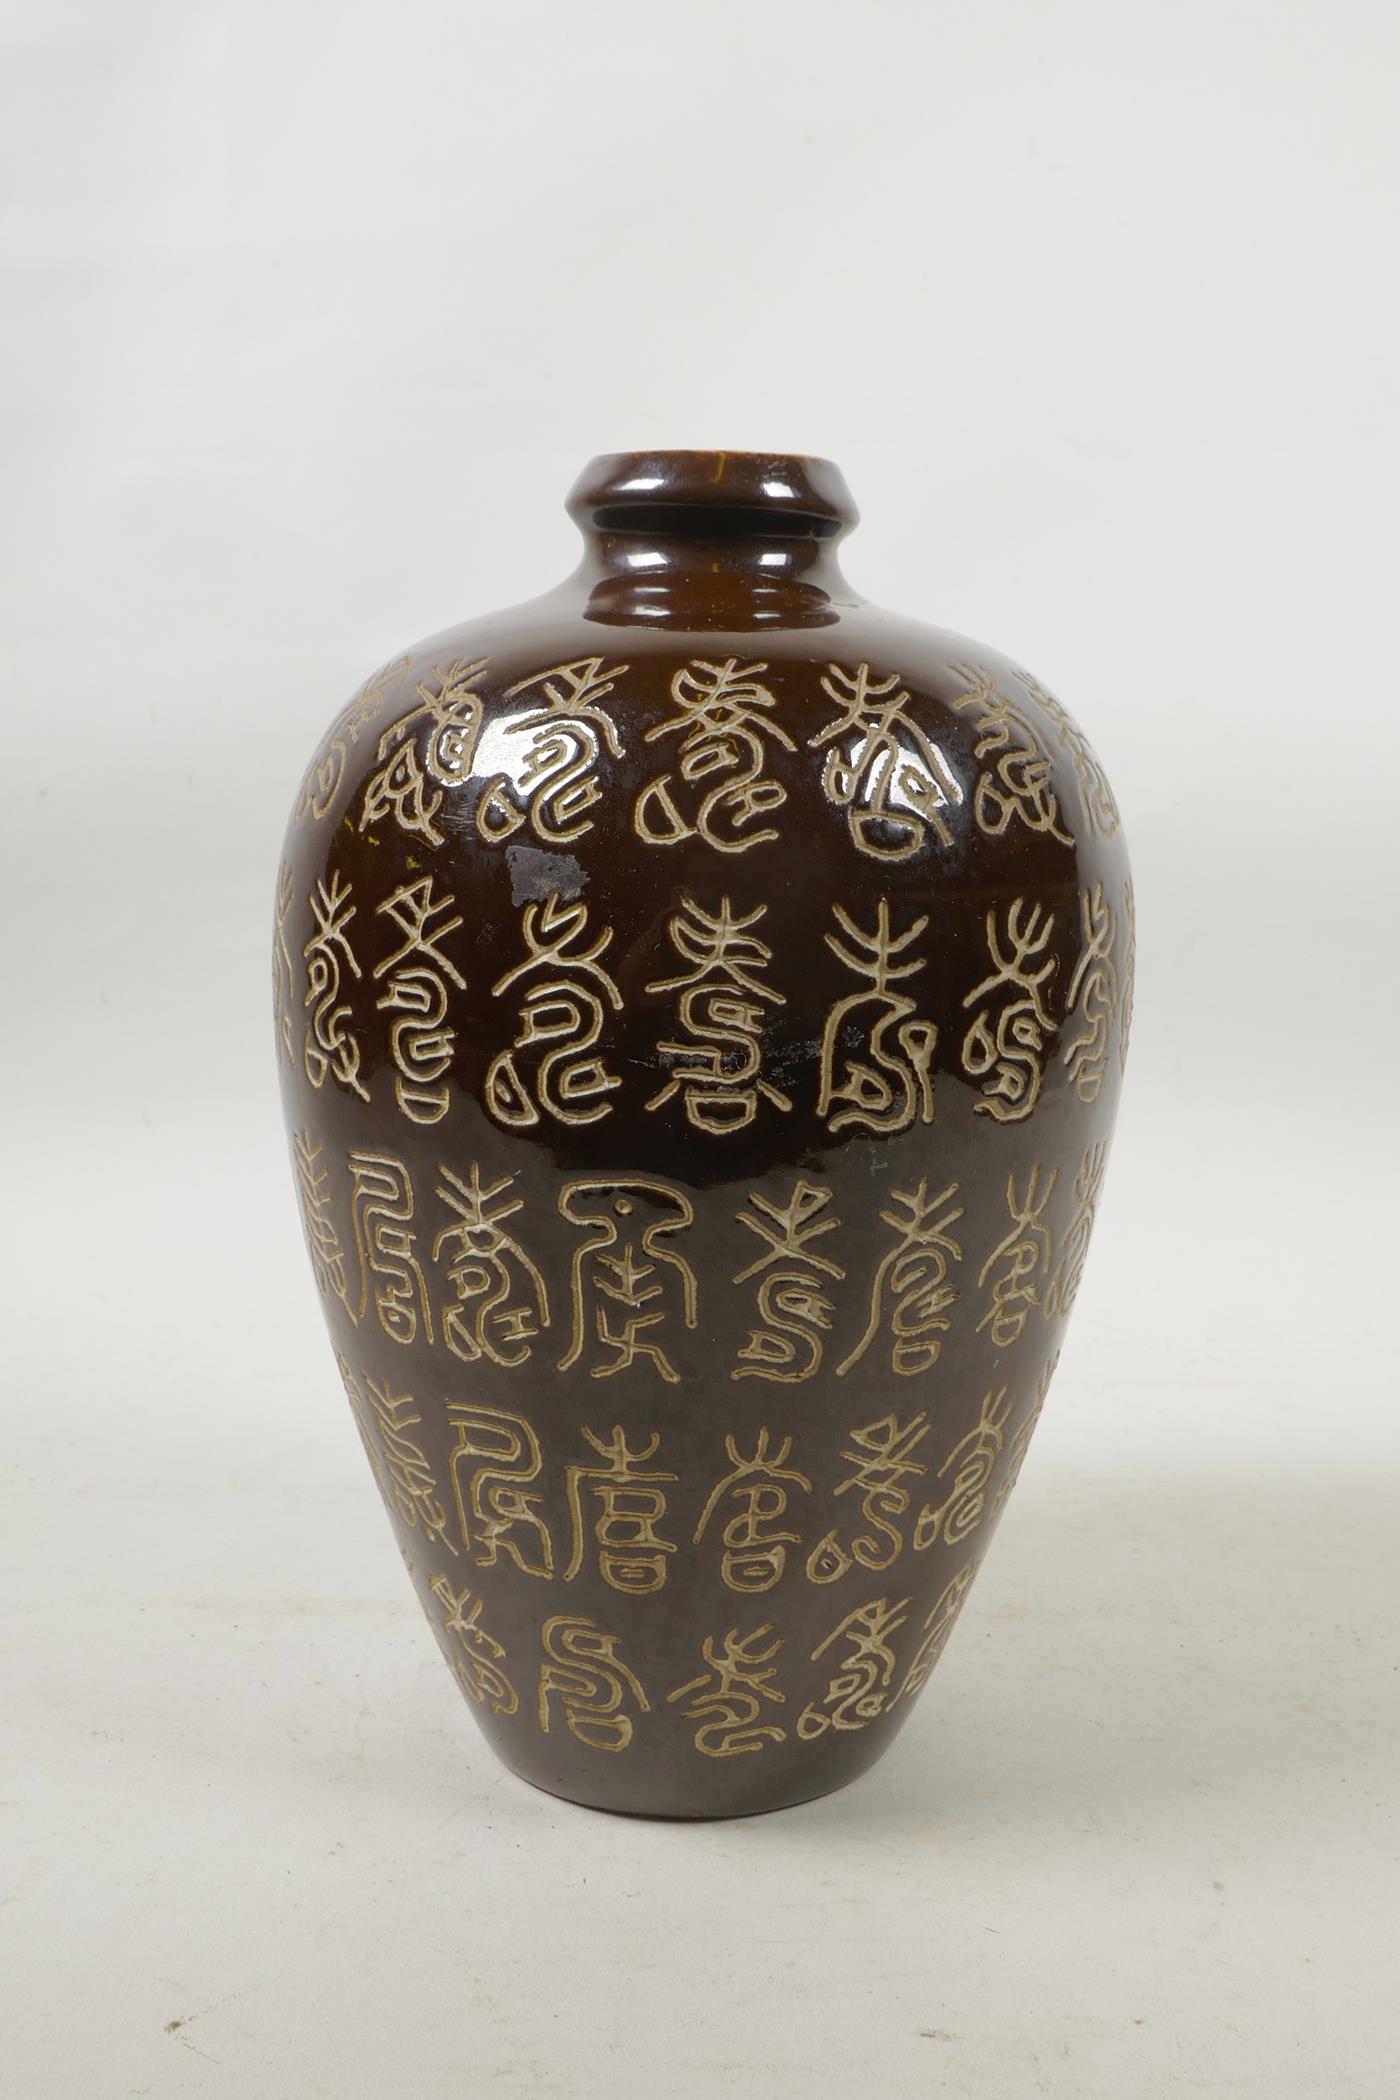 A Chinese treacle glazed porcelain vase with all over chased inscription decoration, 8½" high - Image 3 of 4